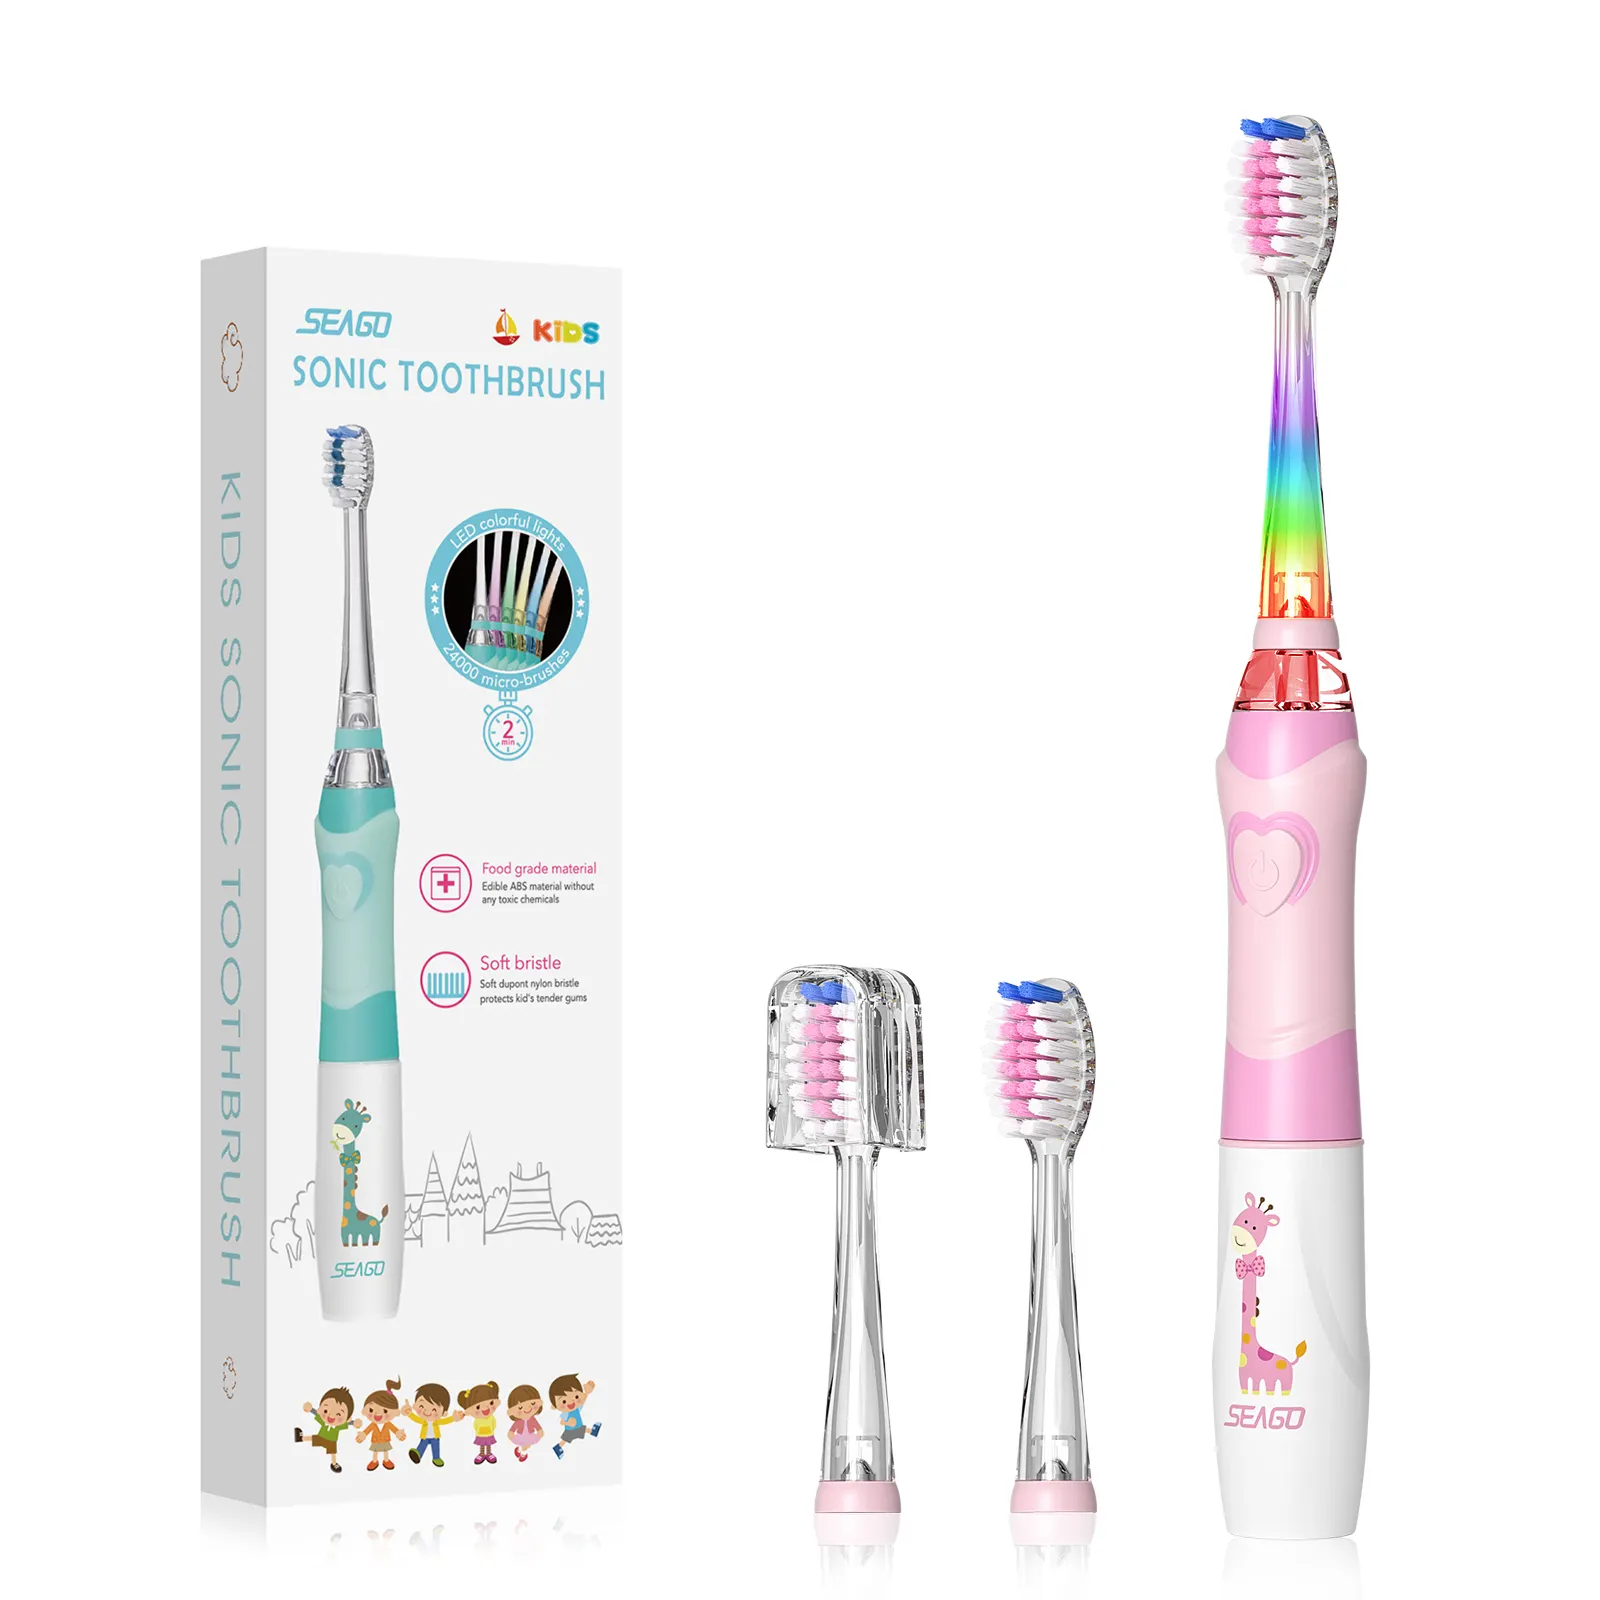 SEAGO Wholesale SG977 LED Light Waterproof Battery Powered Carton Cute Children Kids Child Sonic Oscillating Electric Toothbrush